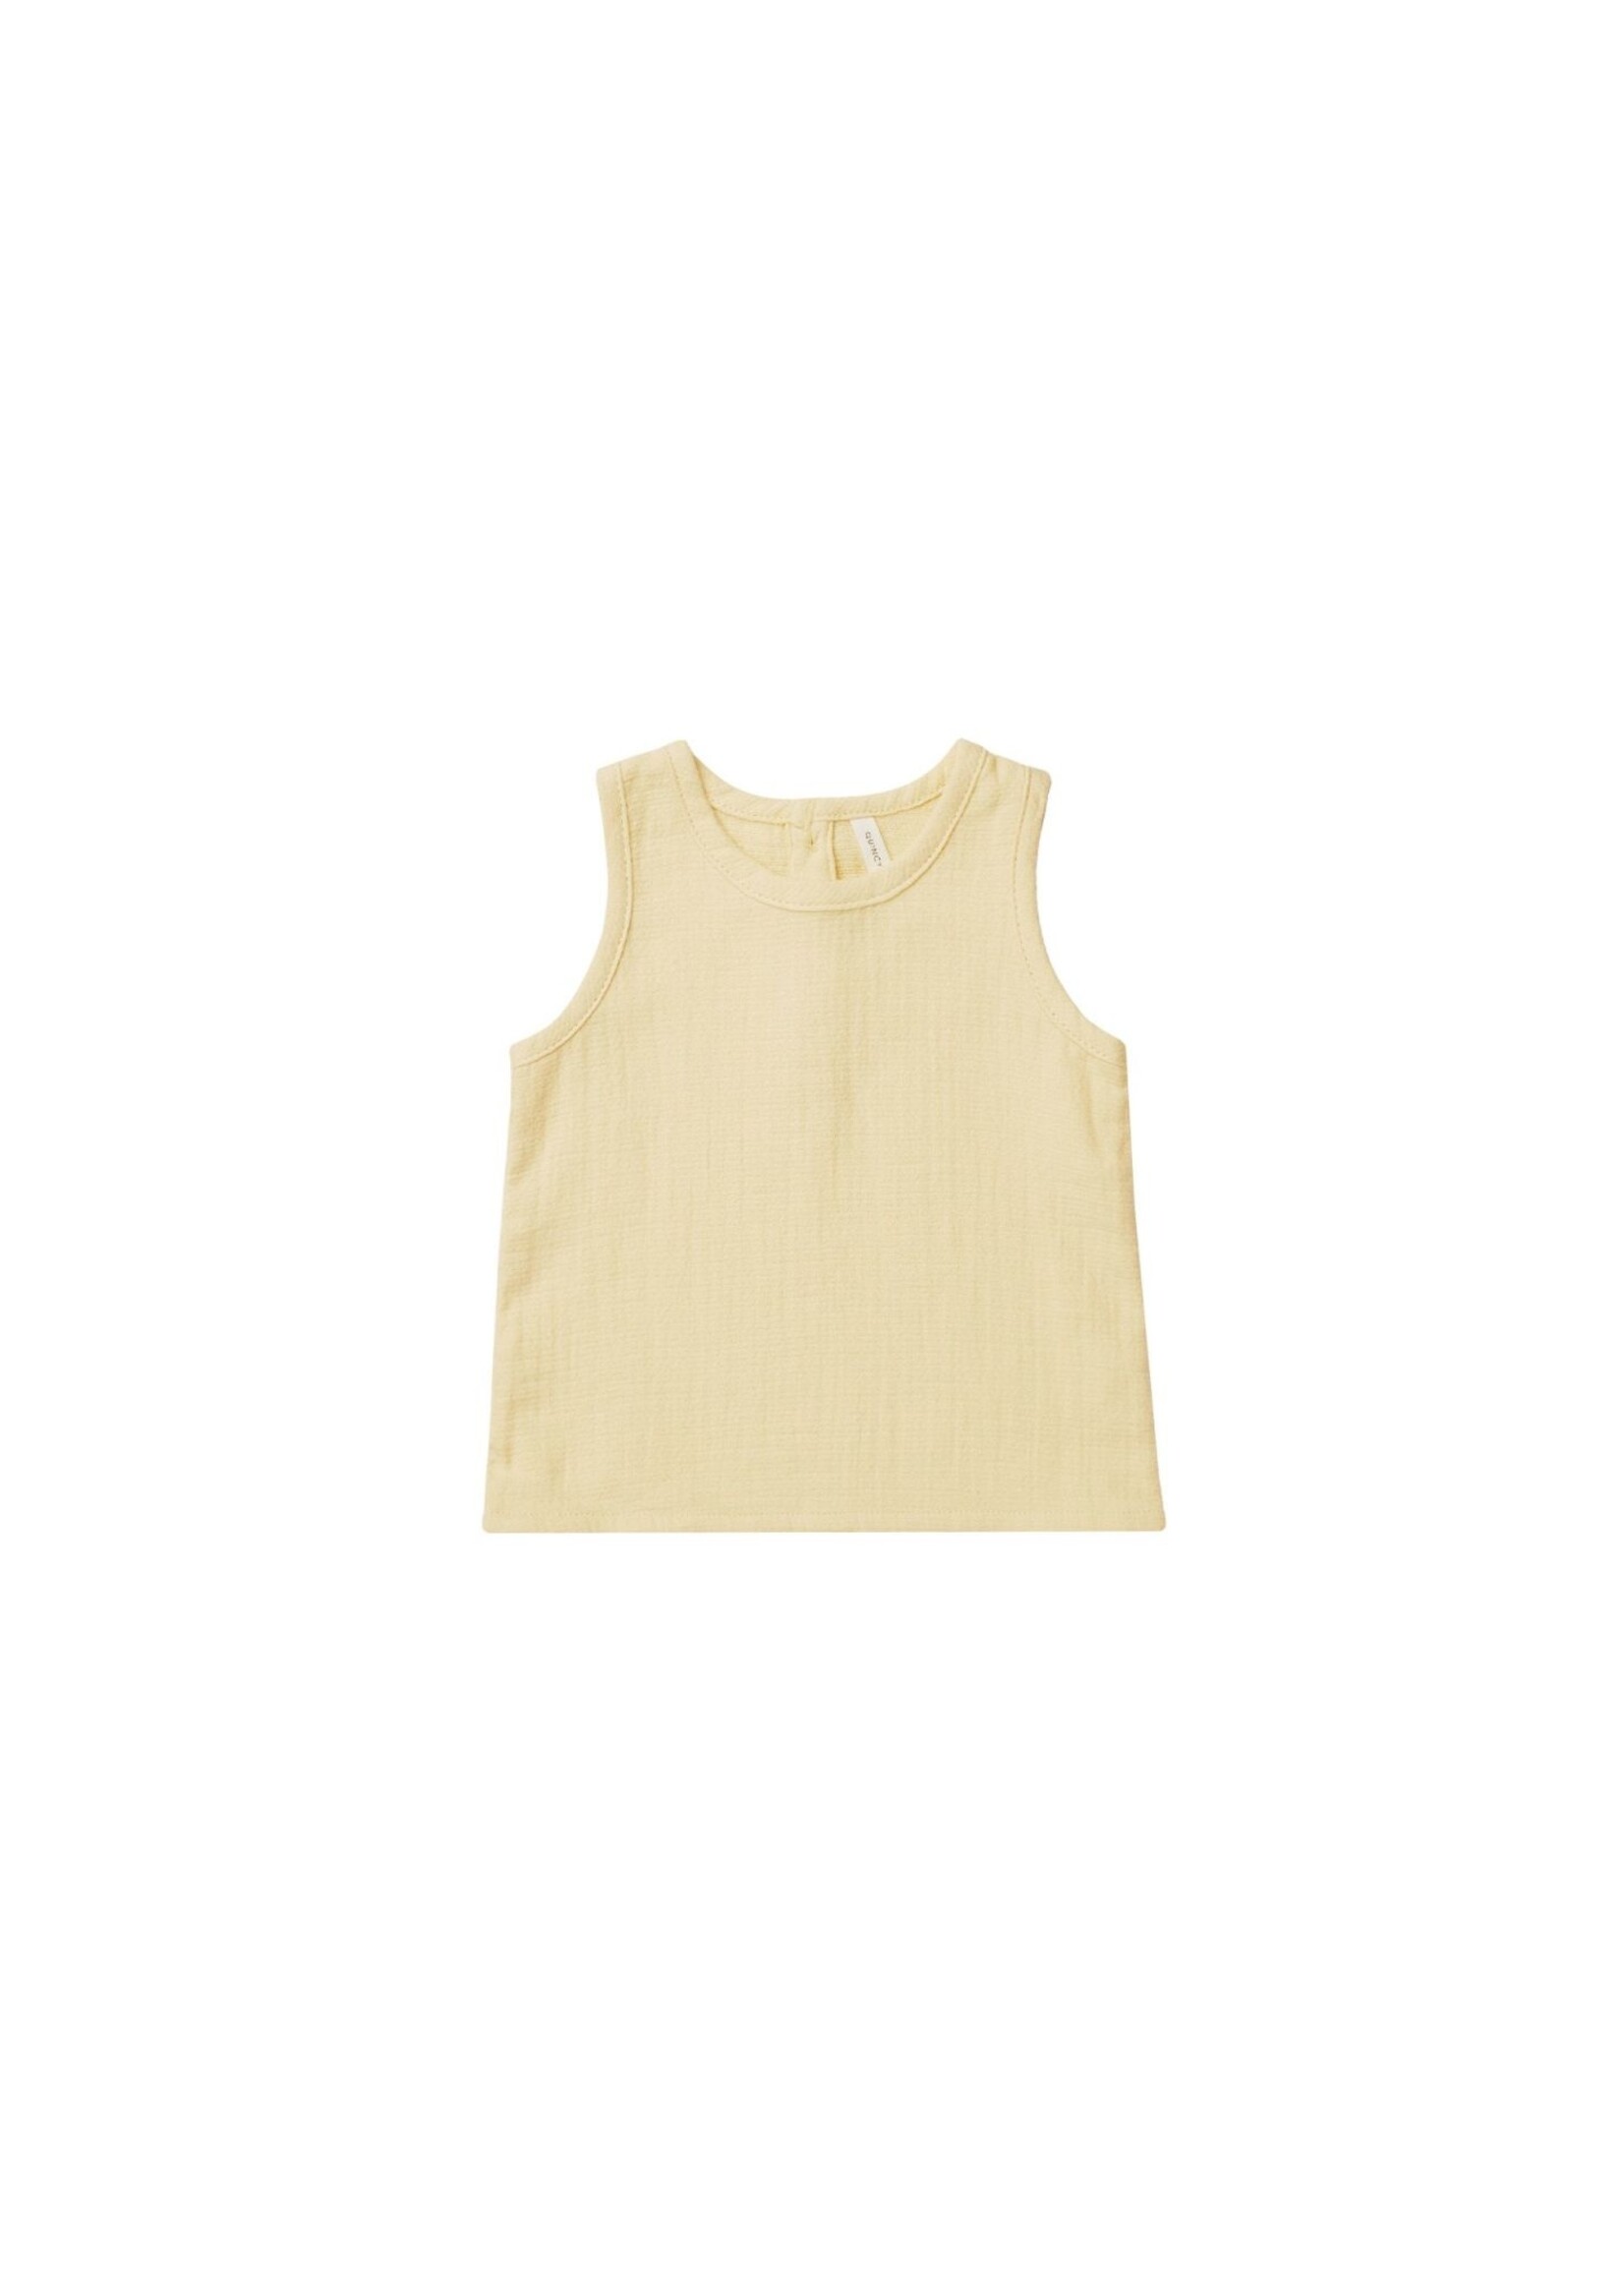 Quincy Mae Quincy Mae - Woven Tank